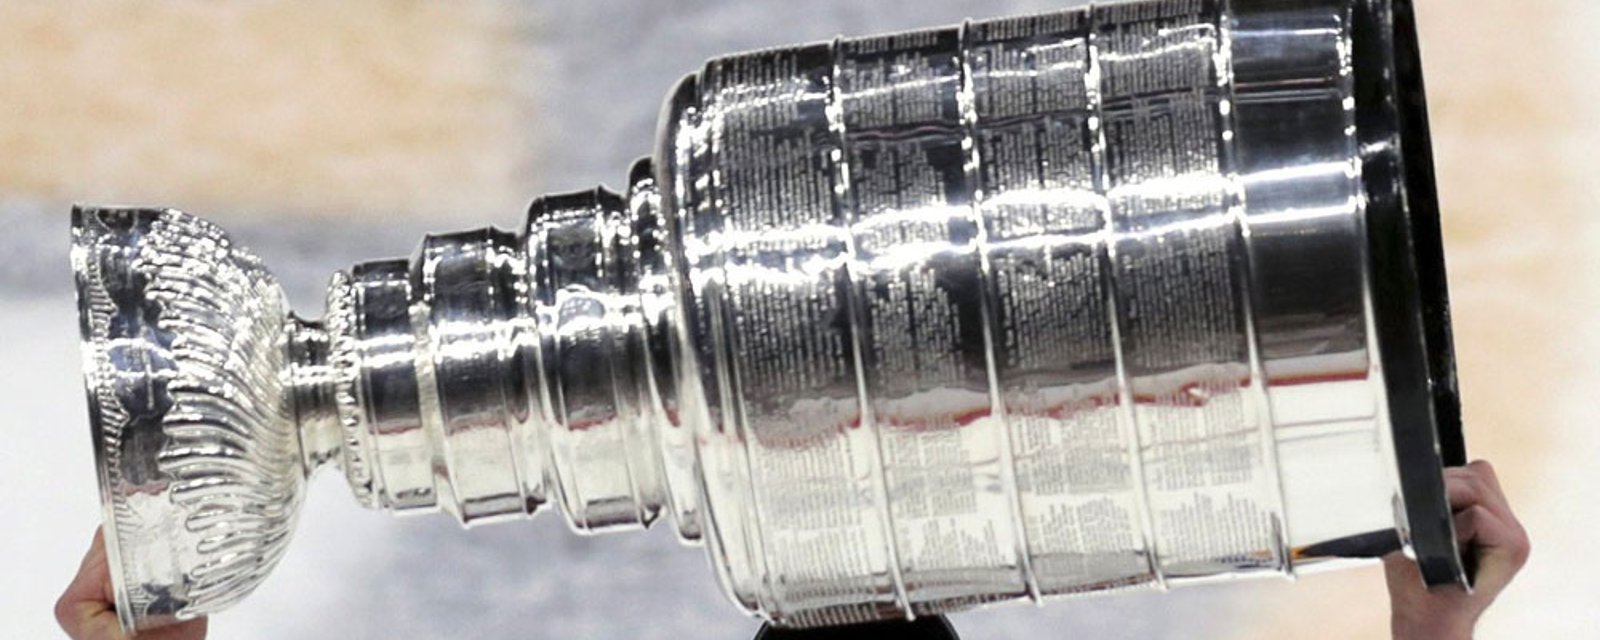 Oddsmakers now have new favourite to win the Stanley Cup